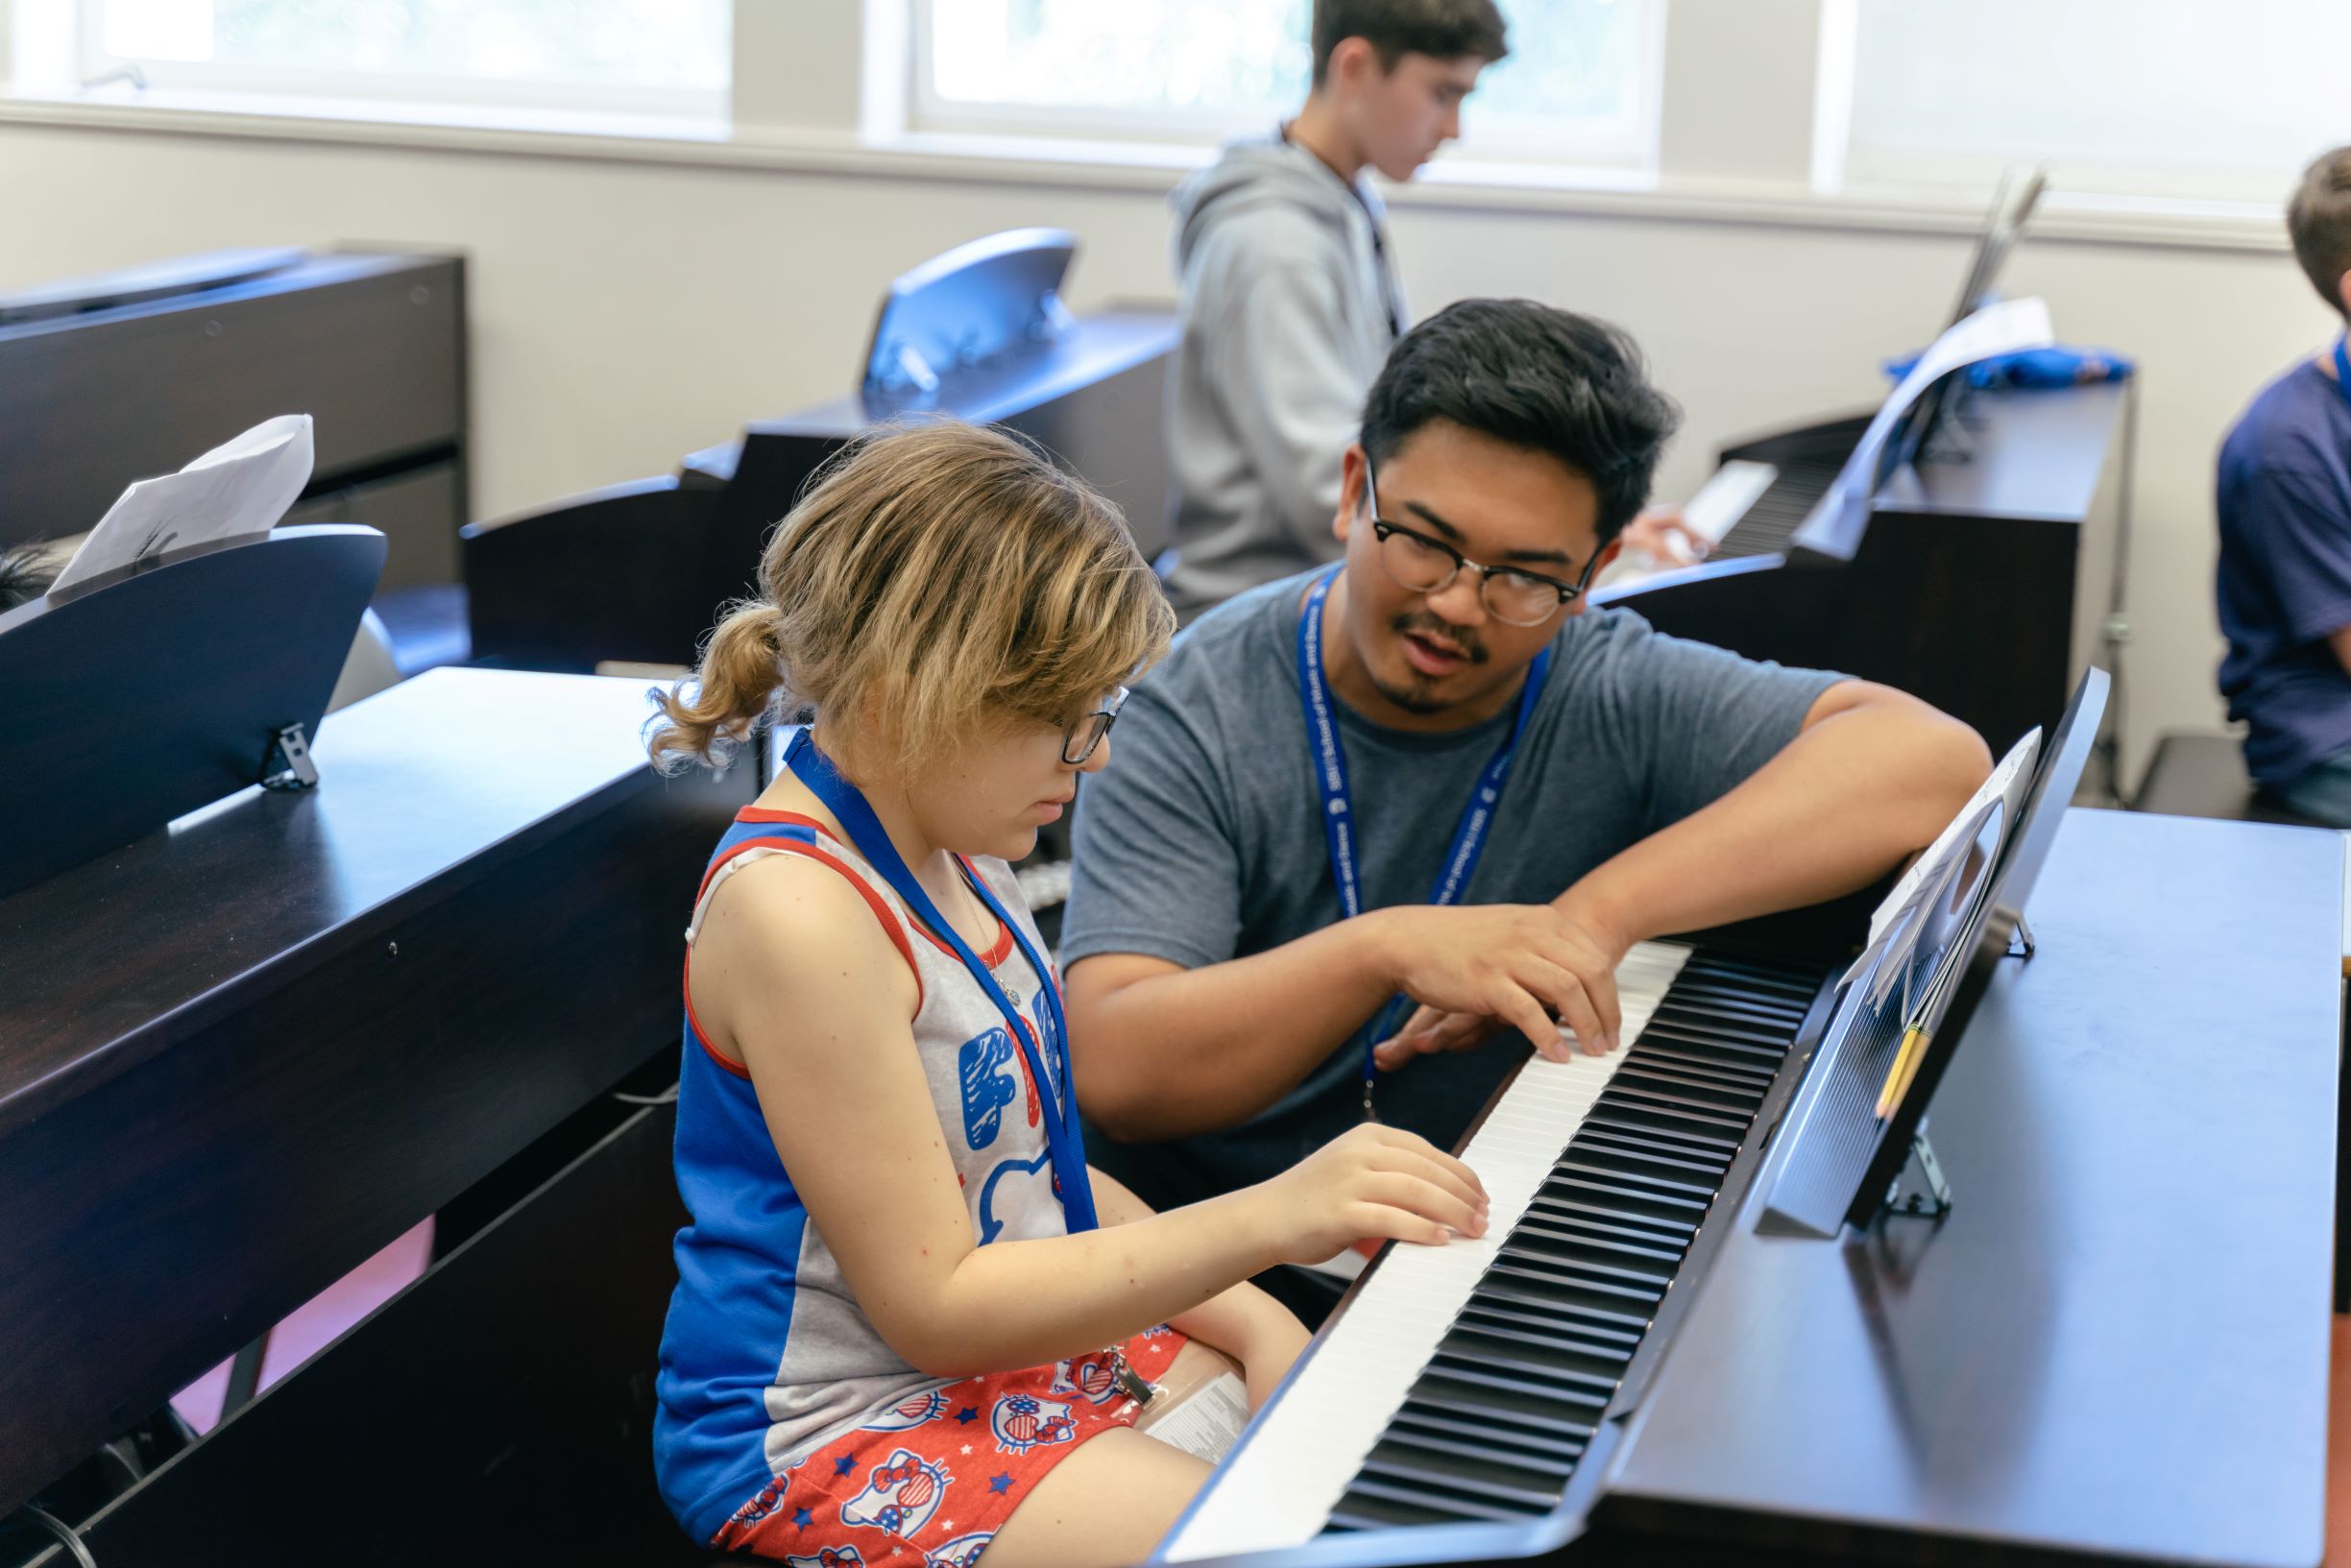 A teacher teaches a young student how to play the keyboard.